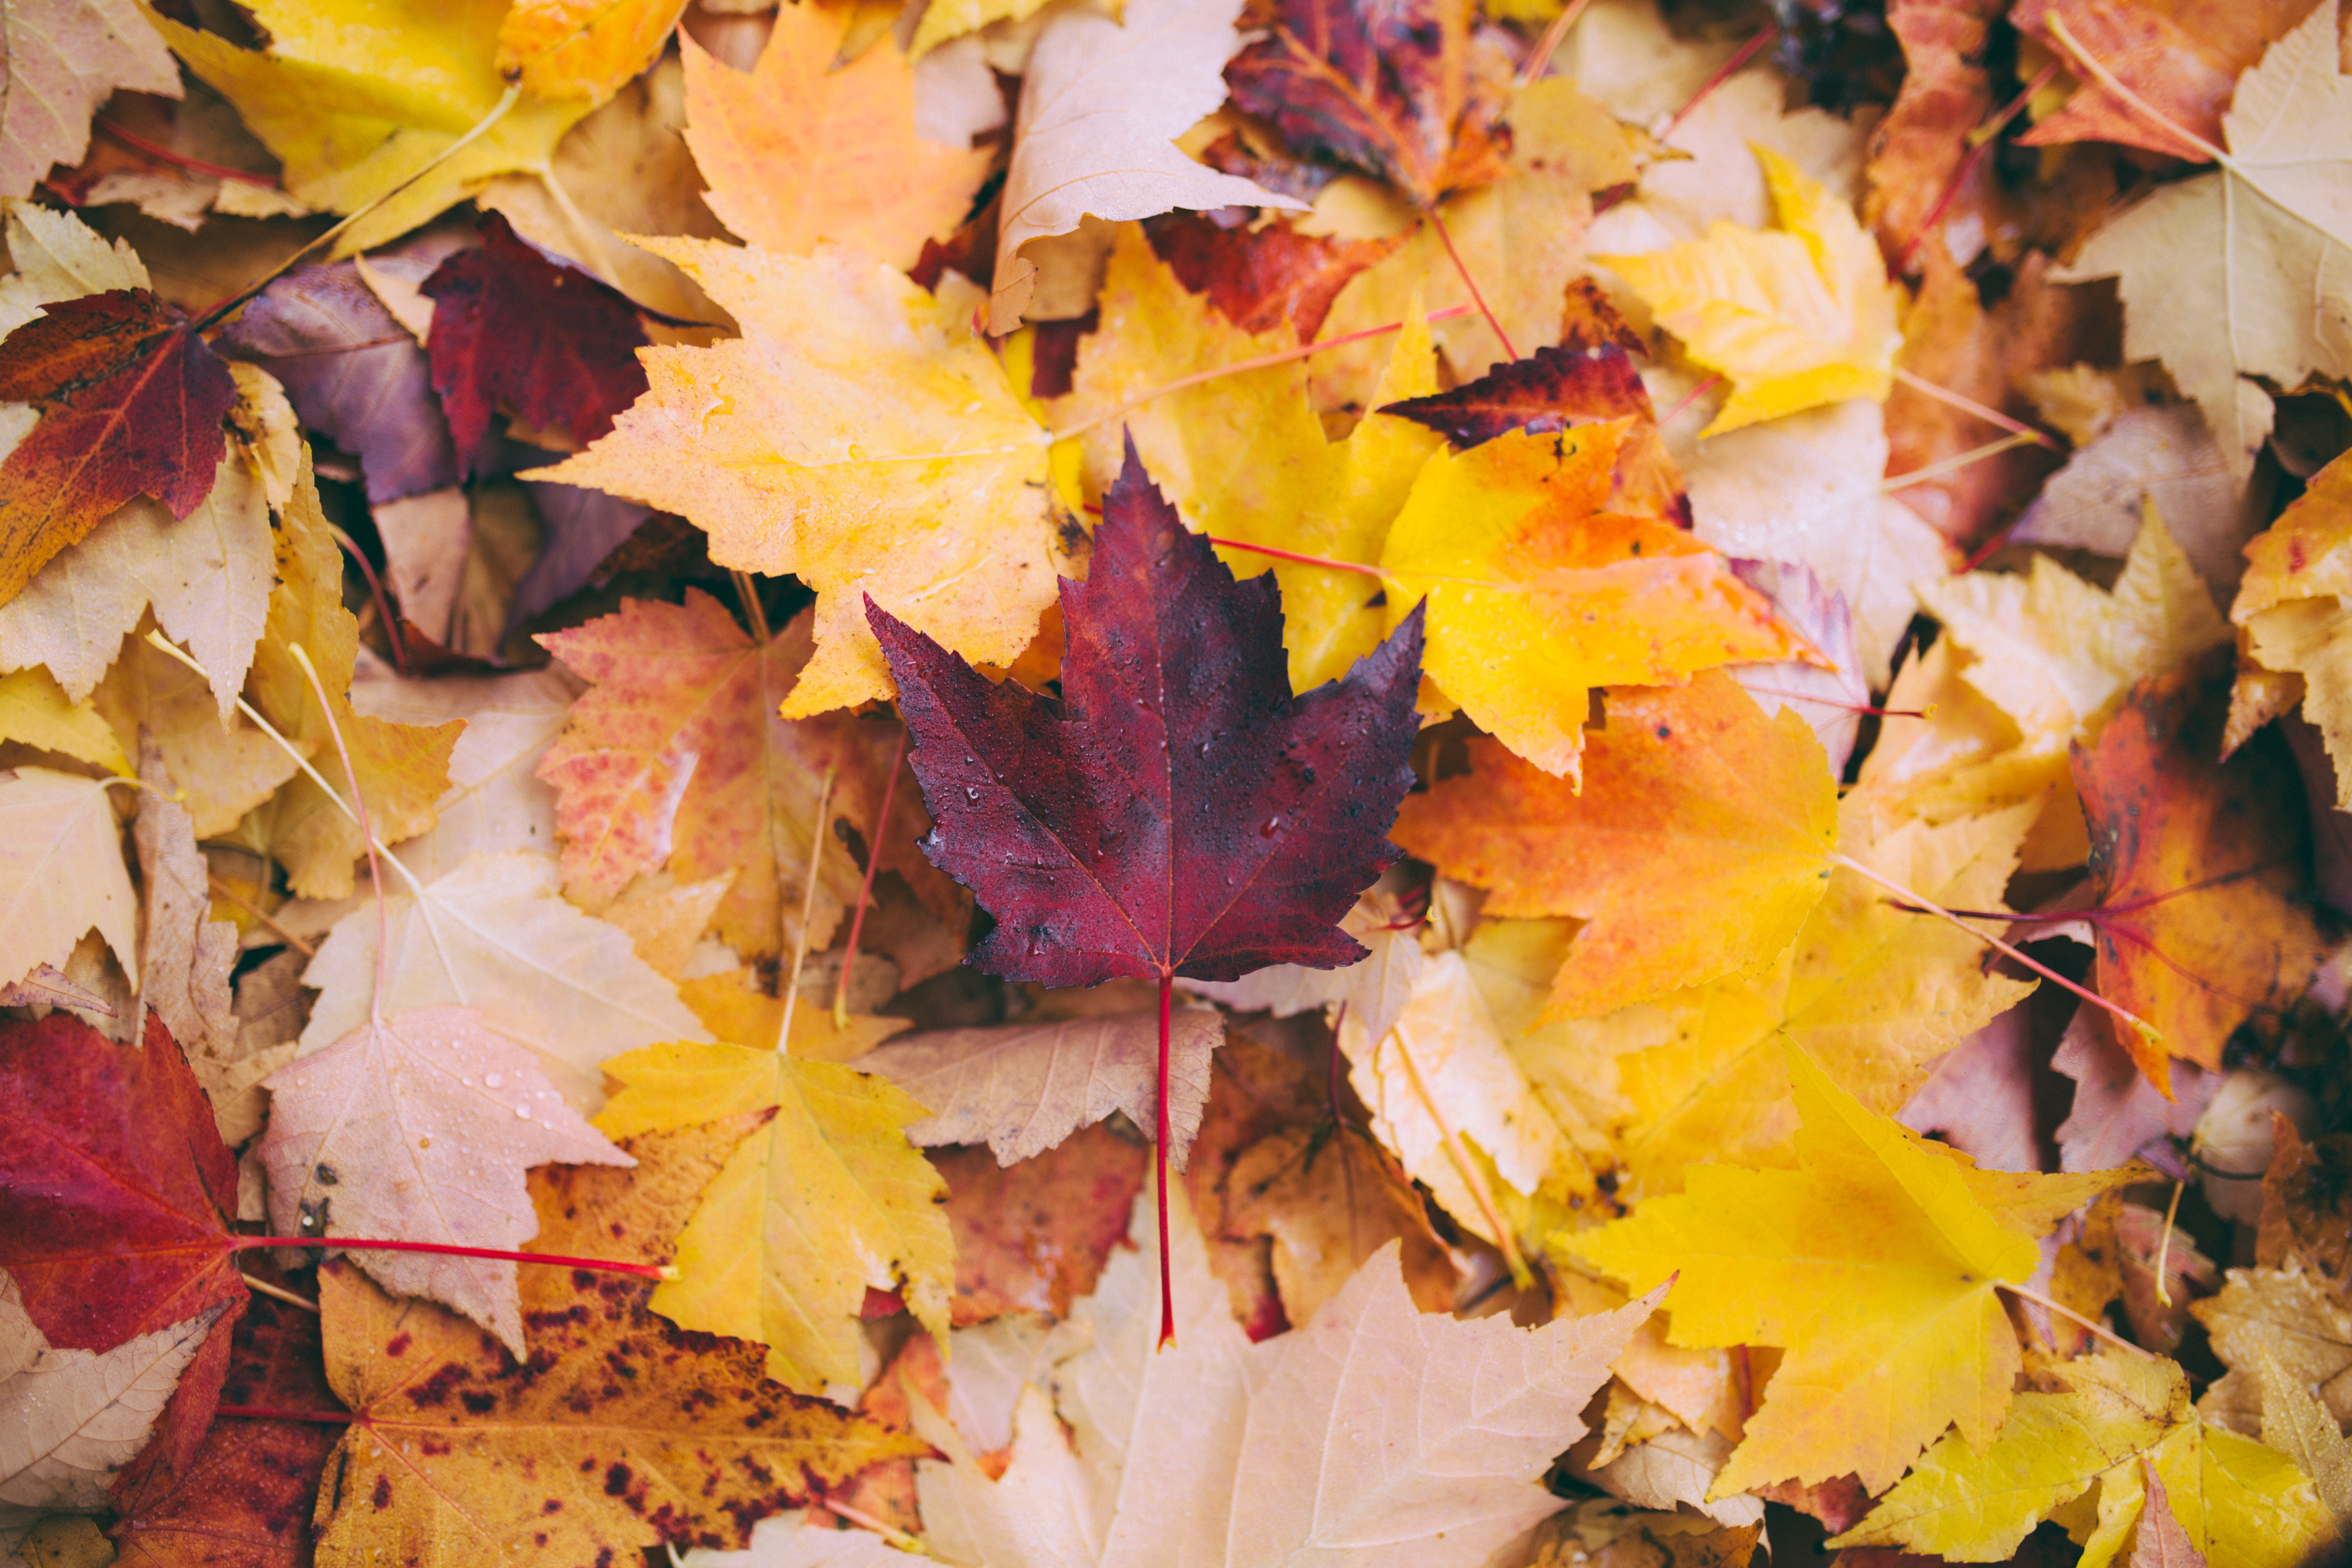 Quiz: How intense is your love for fall?